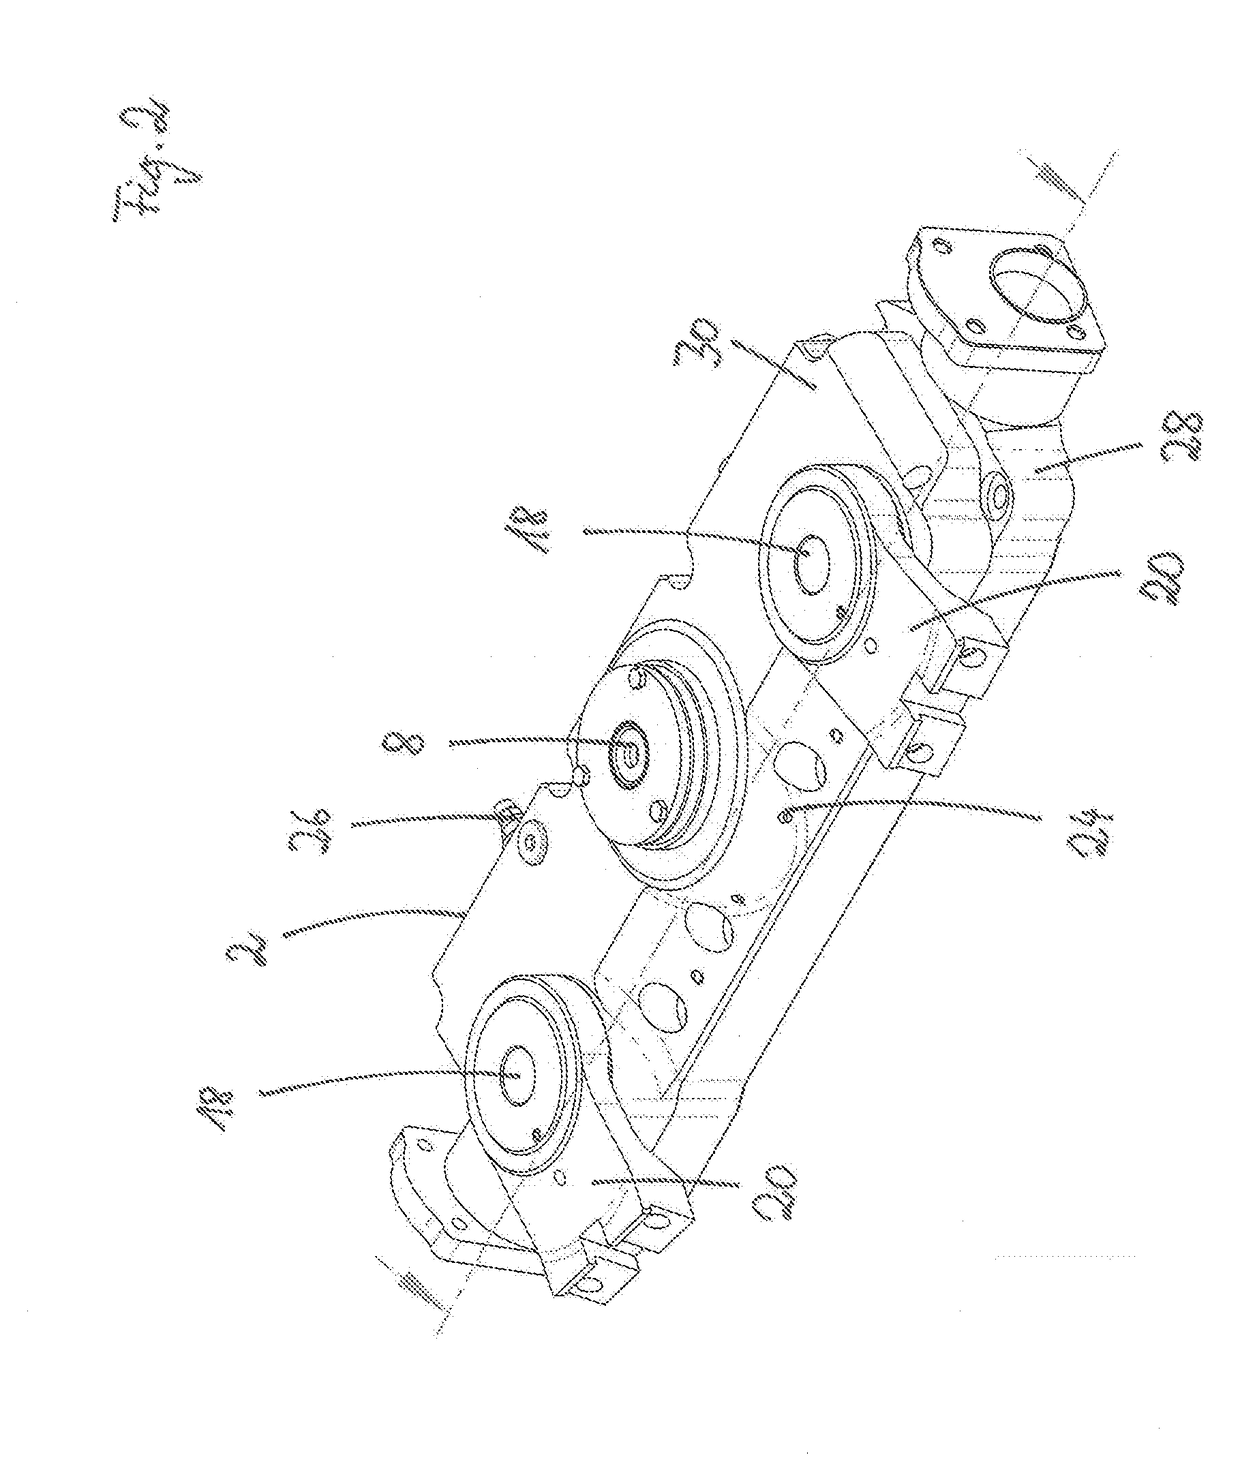 Cutter Bar Drive for a Multi-Section Header for Attachment to Harvesters